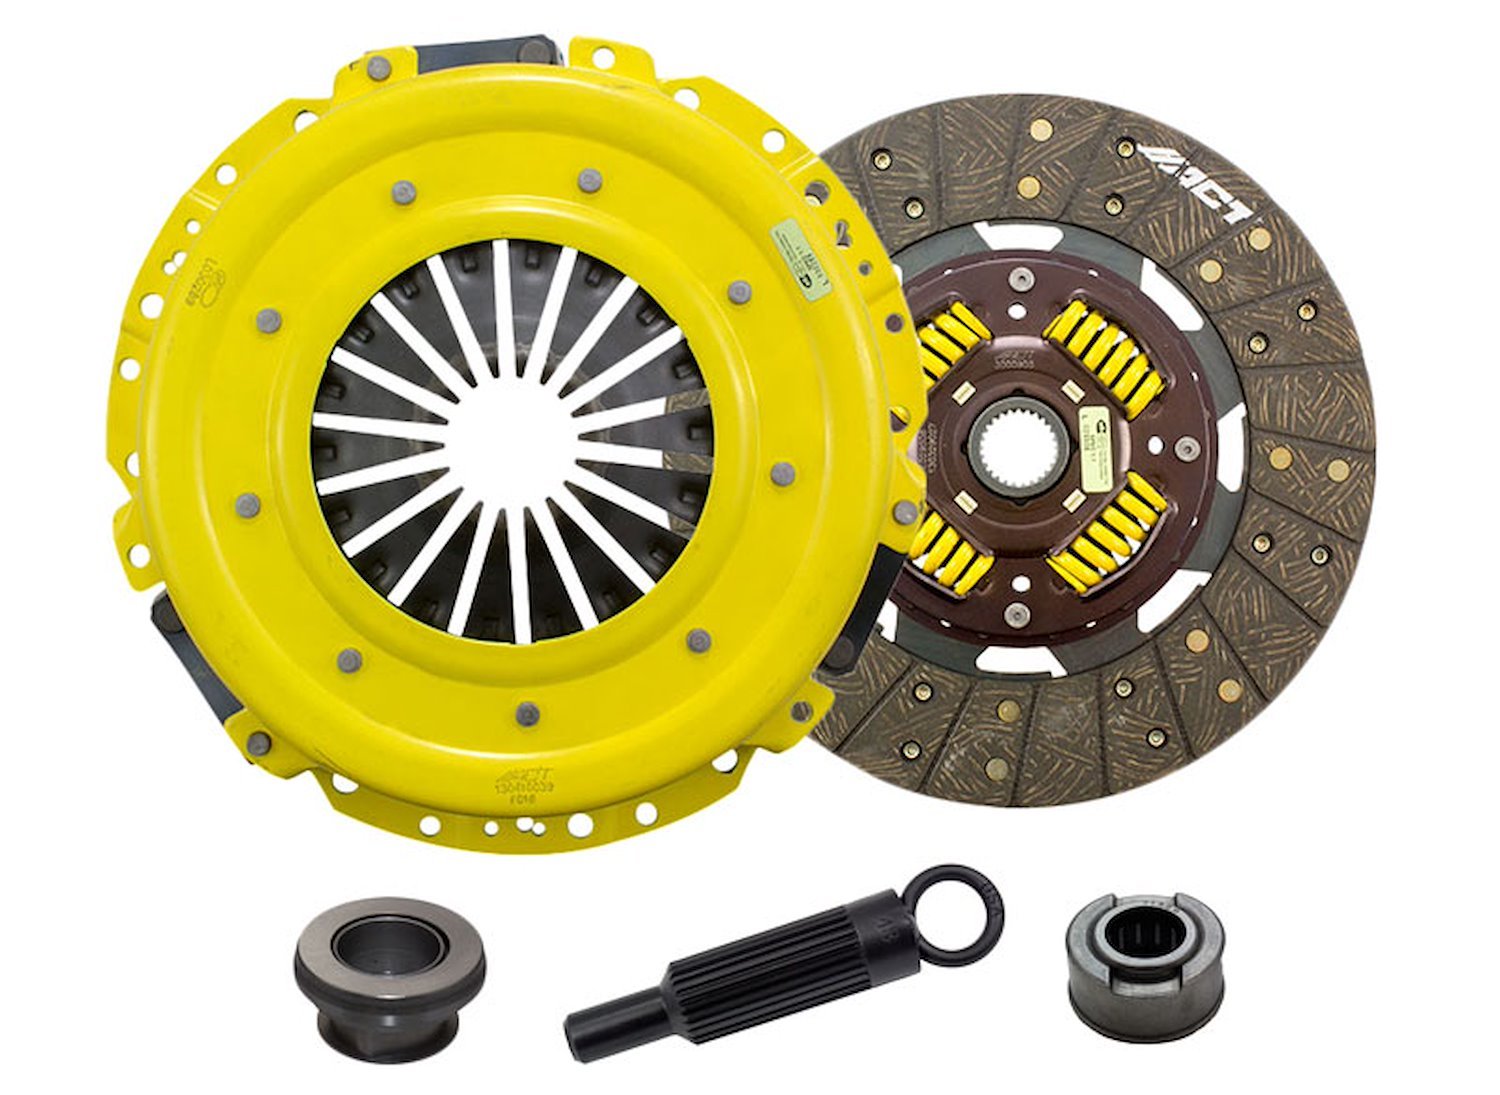 HD/Performance Street Sprung Transmission Clutch Kit Fits Select Ford/Lincoln/Mercury/Mazda